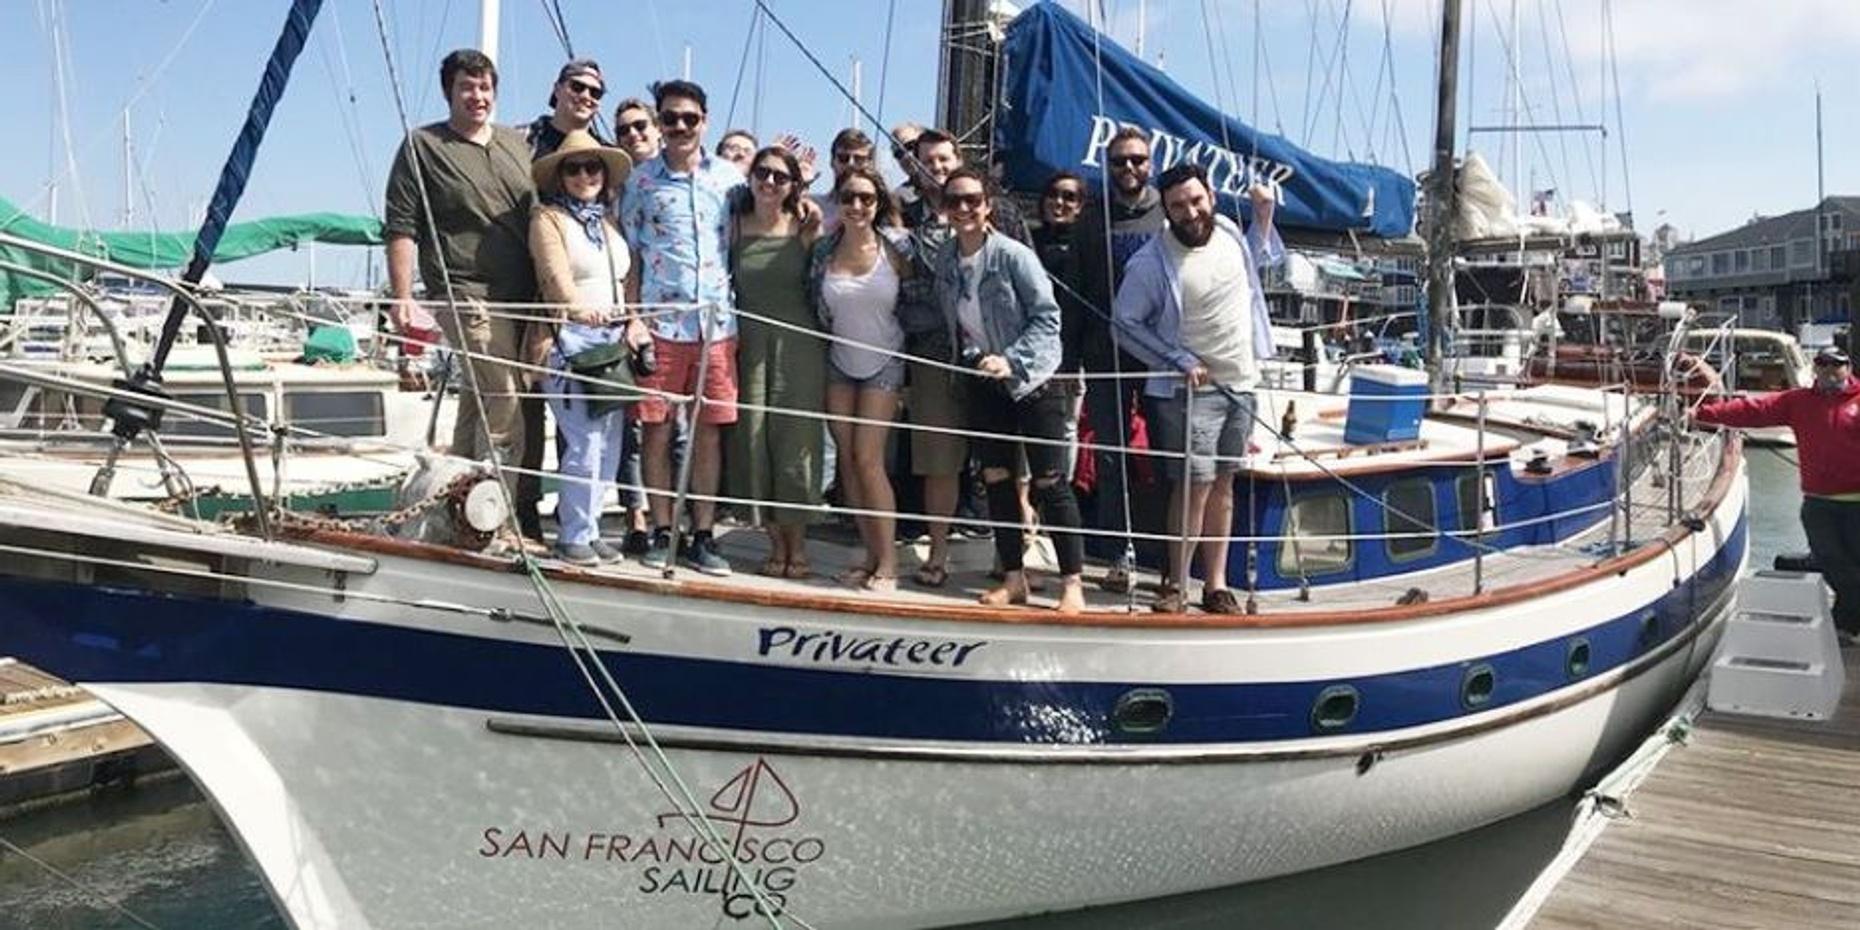 90-Minute Sailing Tour With Drinks in San Francisco